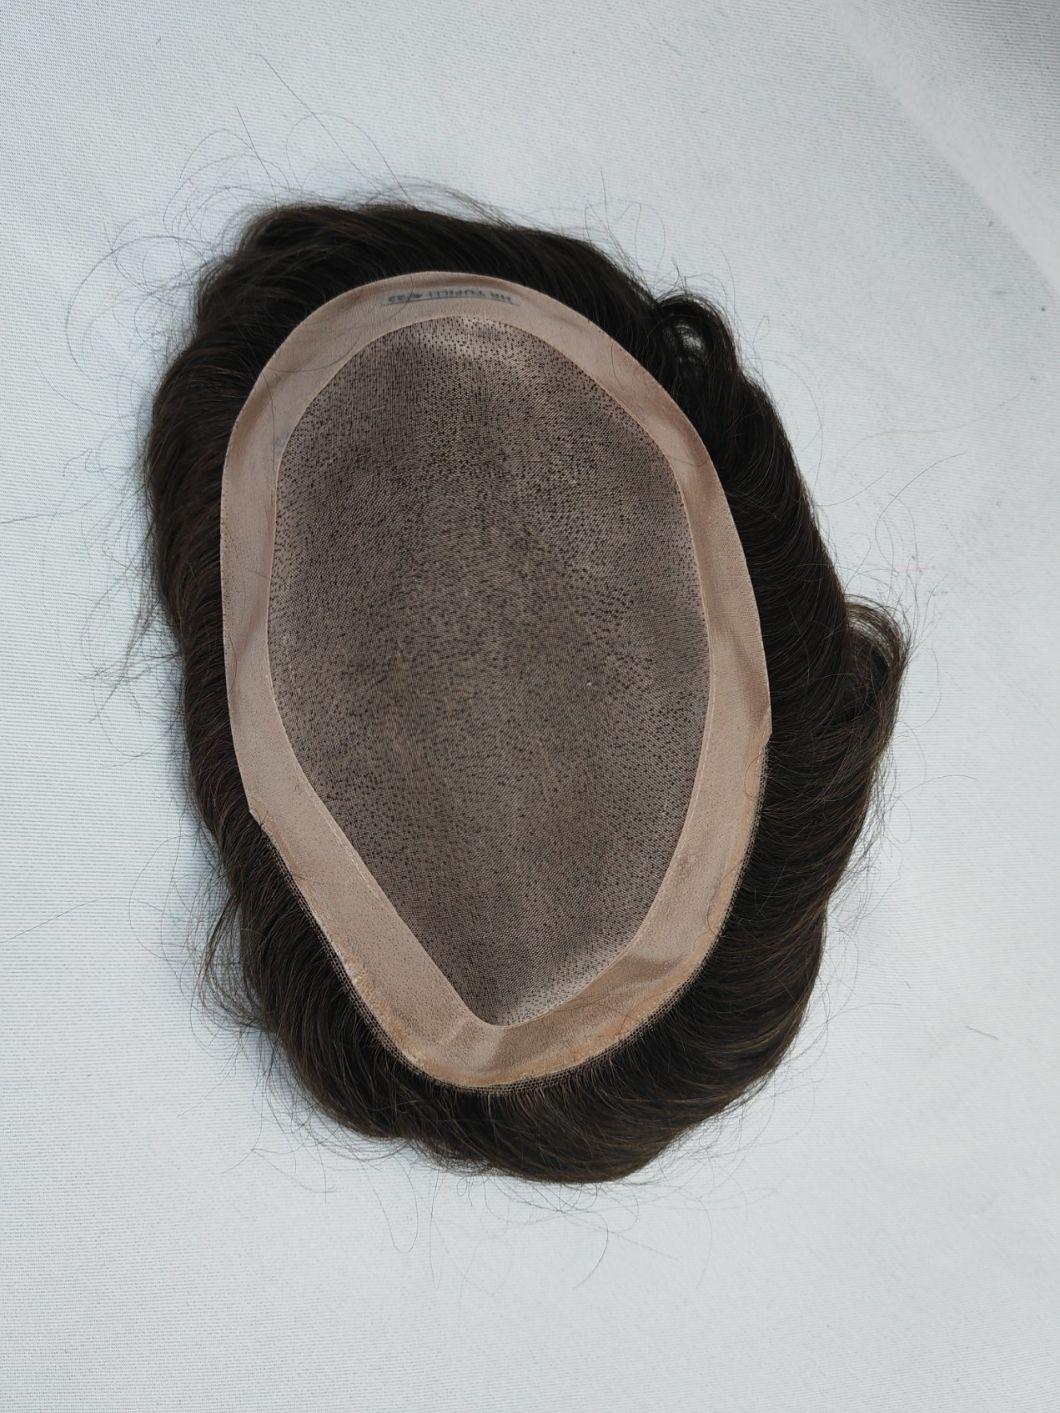 2022 Best Hand Knotted Natural Fine Mono Base Human Hair Toupee Made of Remy Human Hair